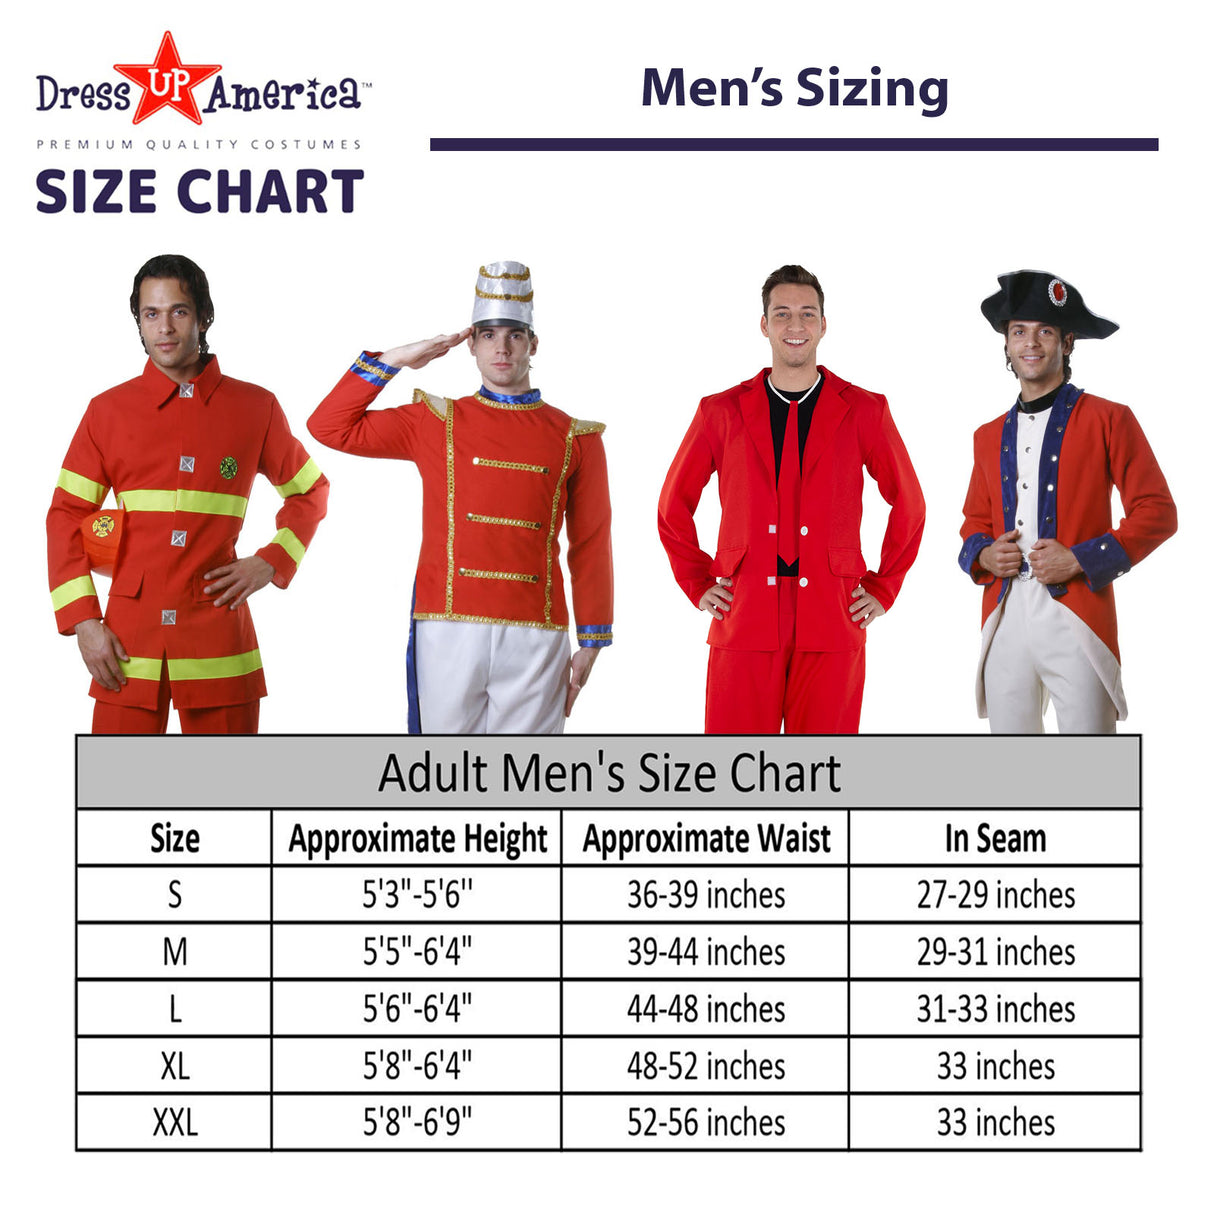 Toy Soldier Costume - Adults